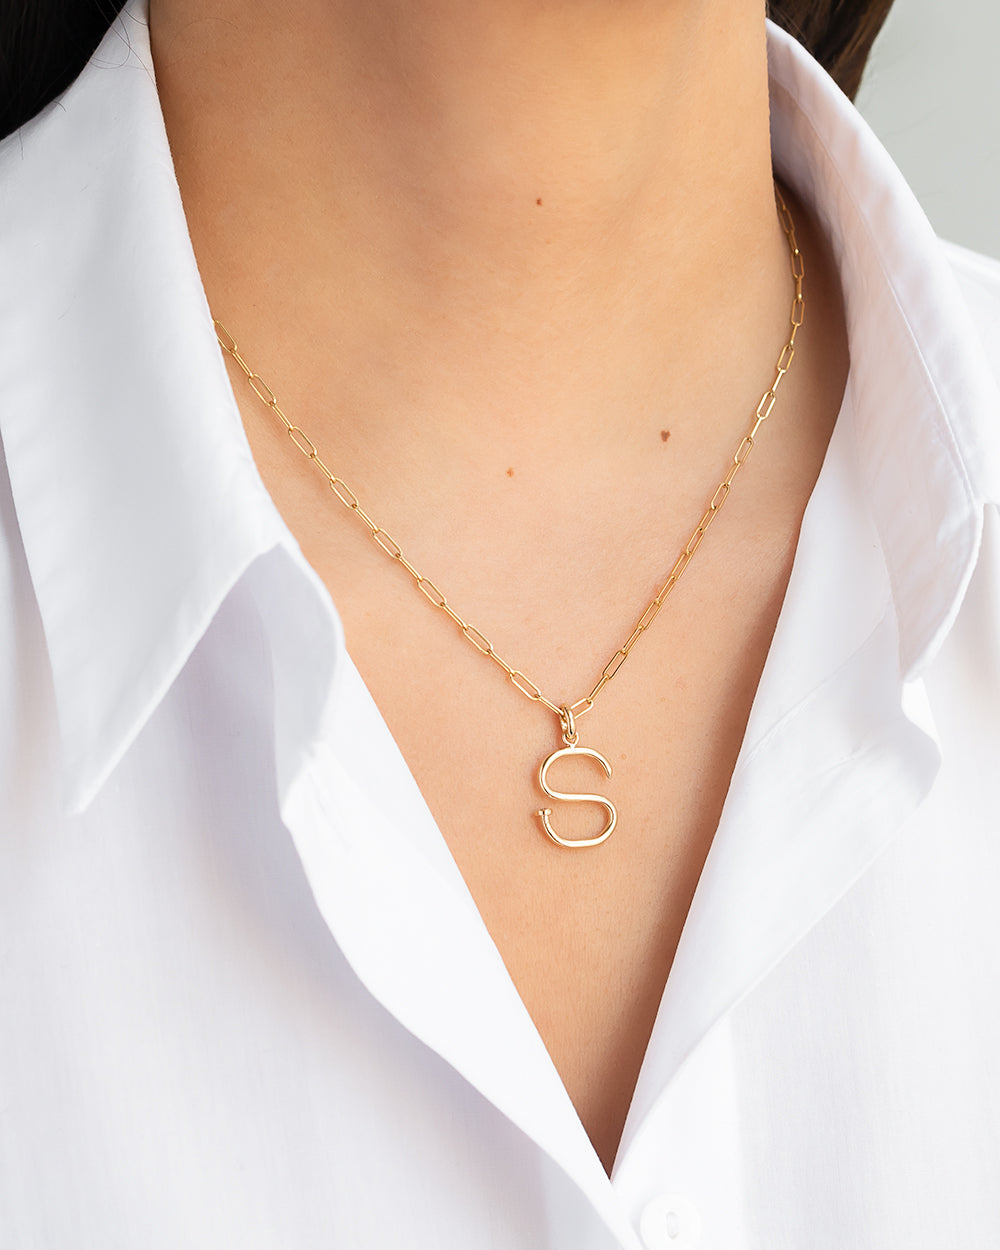 Personalized Letter Necklace, Initial Necklace - 16mm Pendant Size